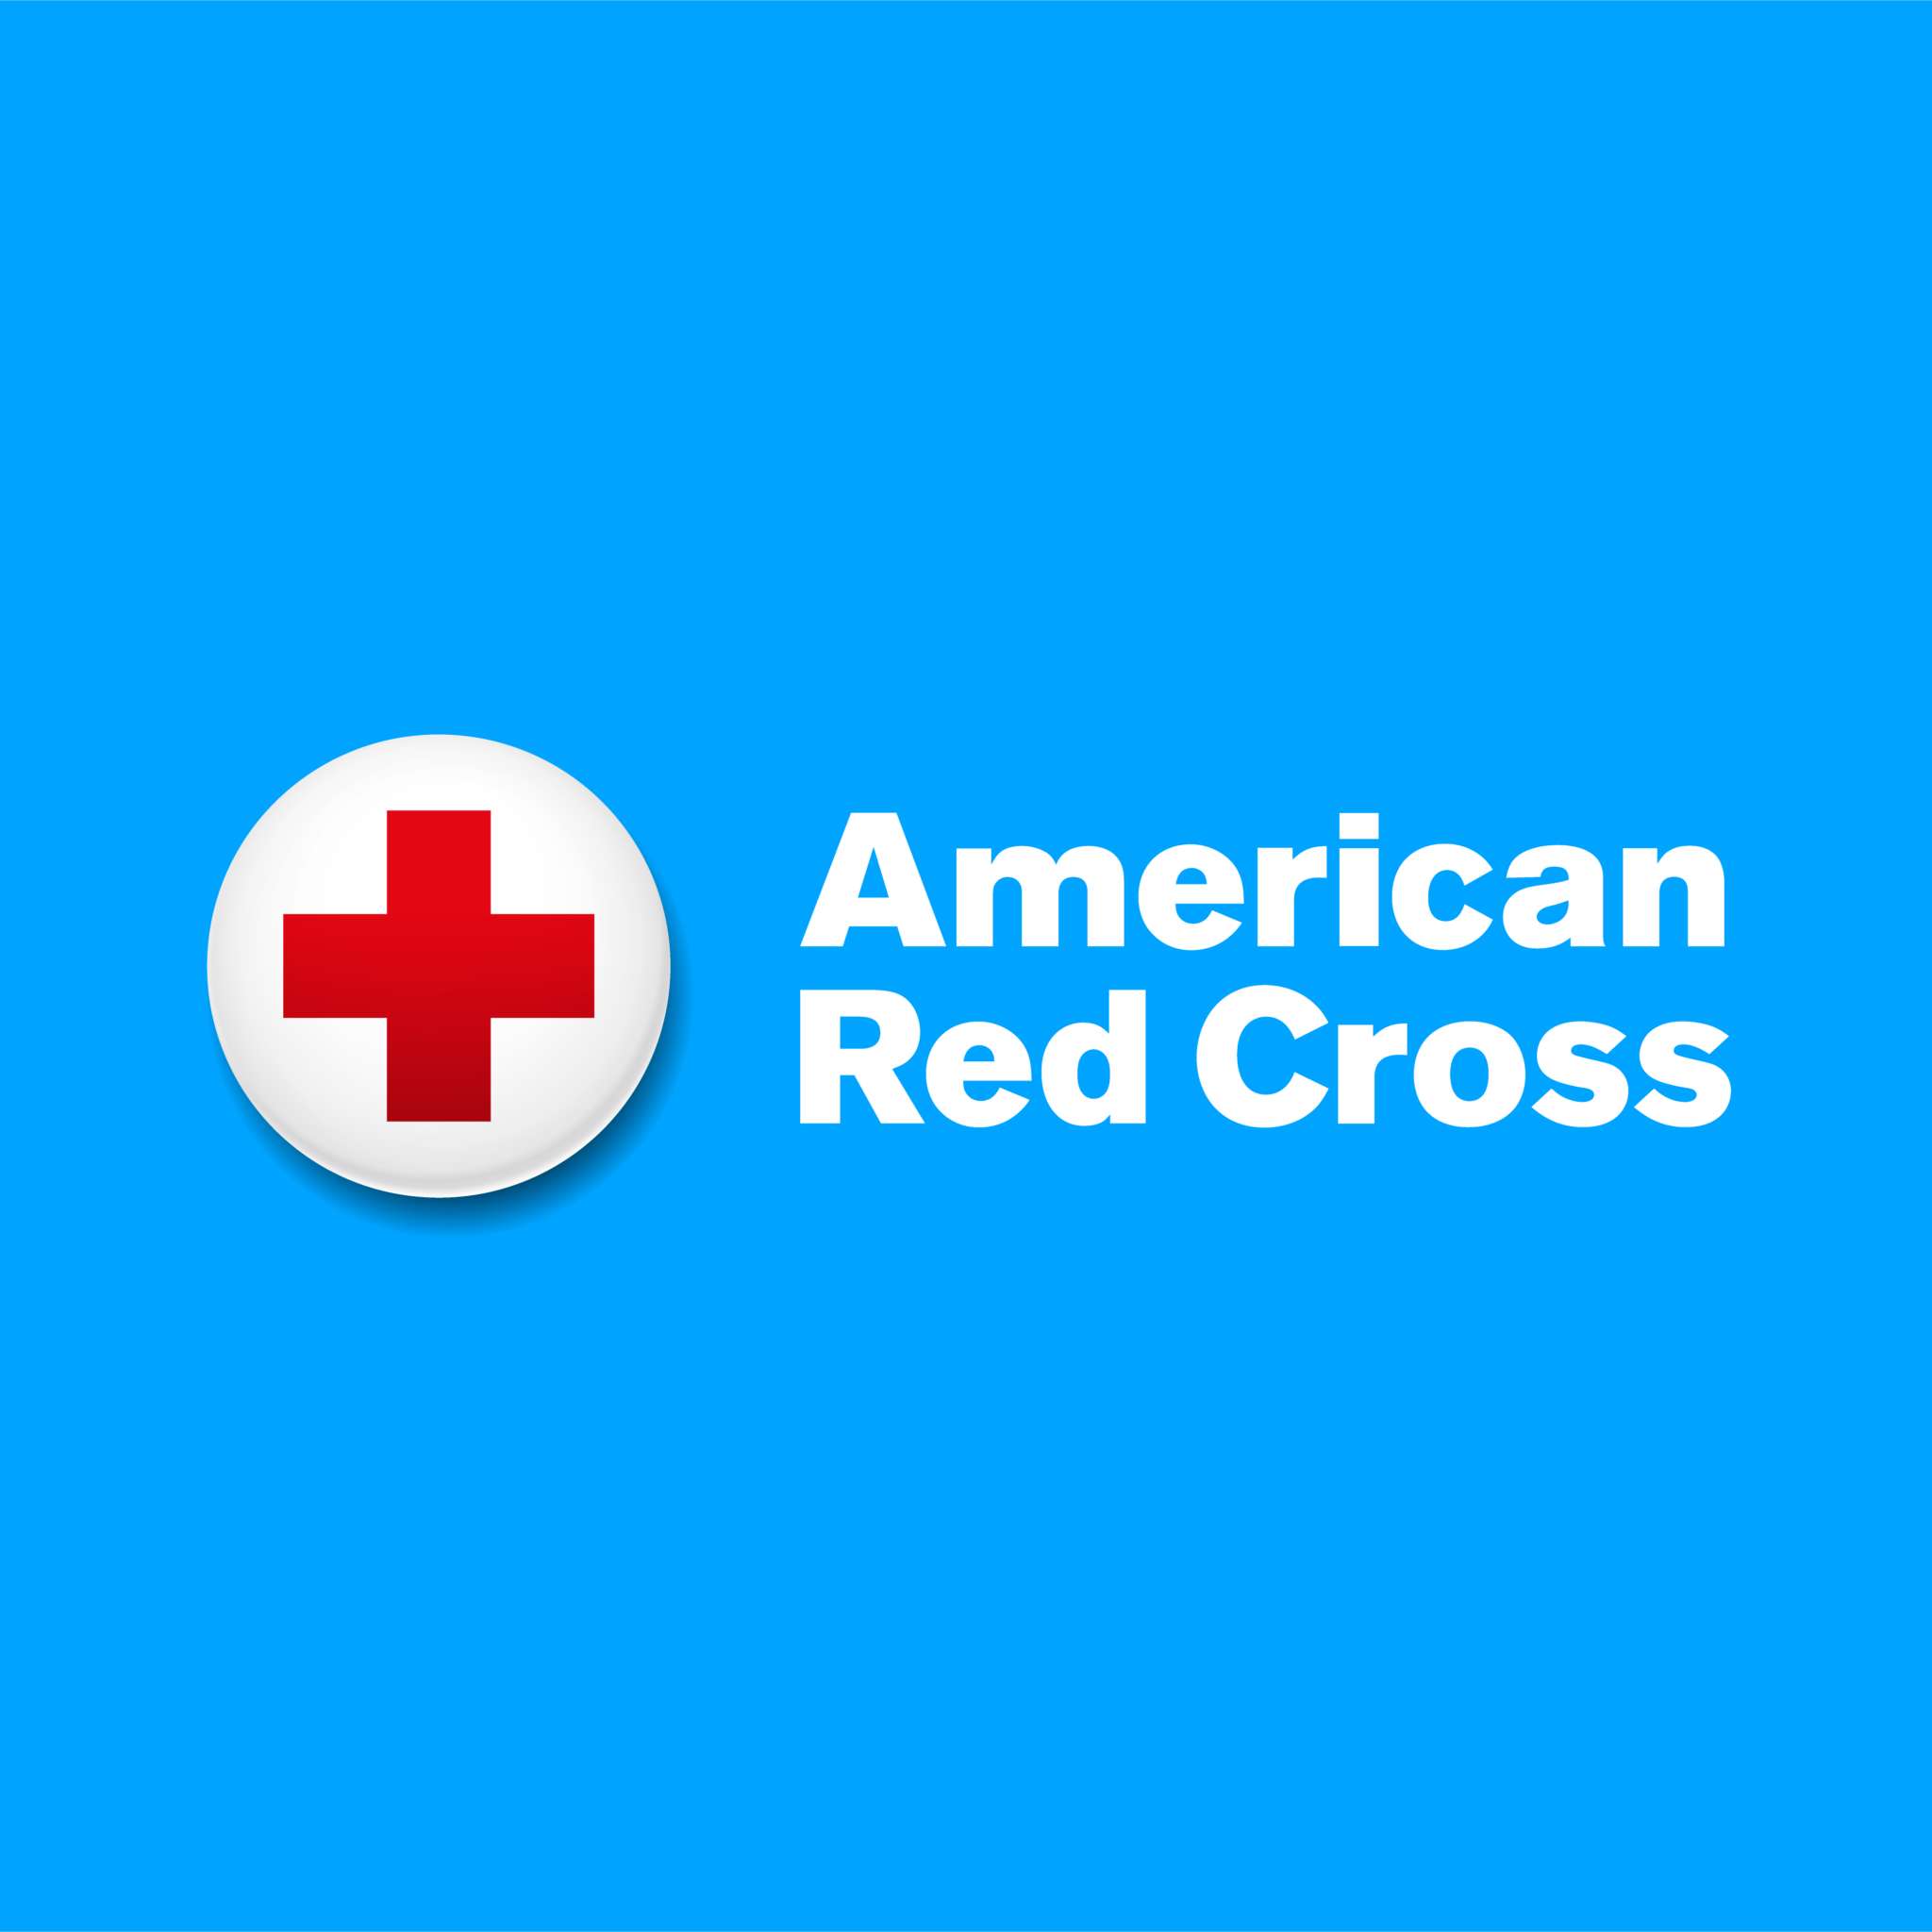 American Red Cross logo on blue background